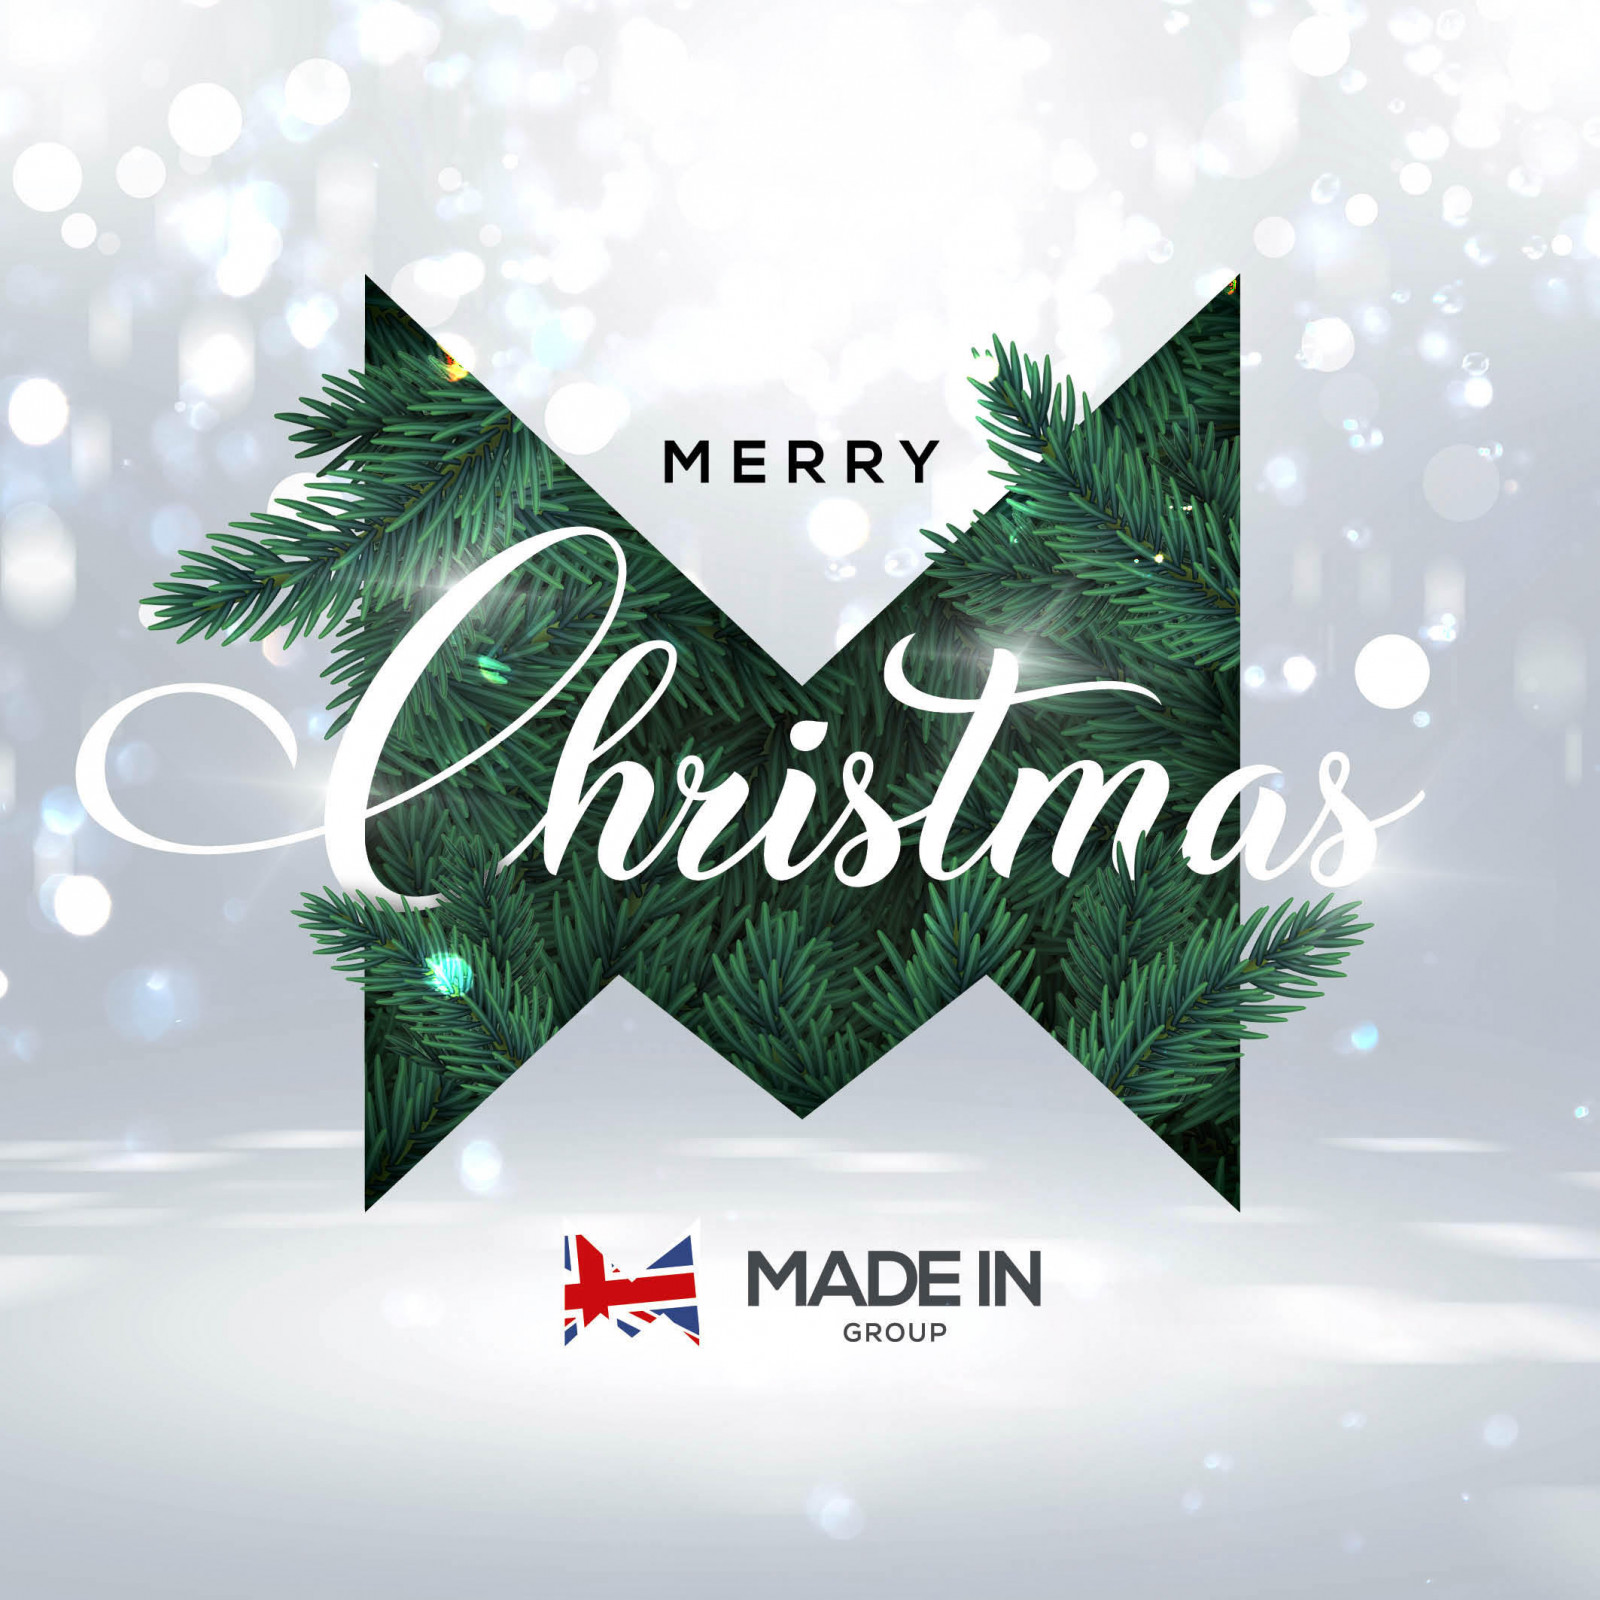 Merry Christmas from the Made in Group